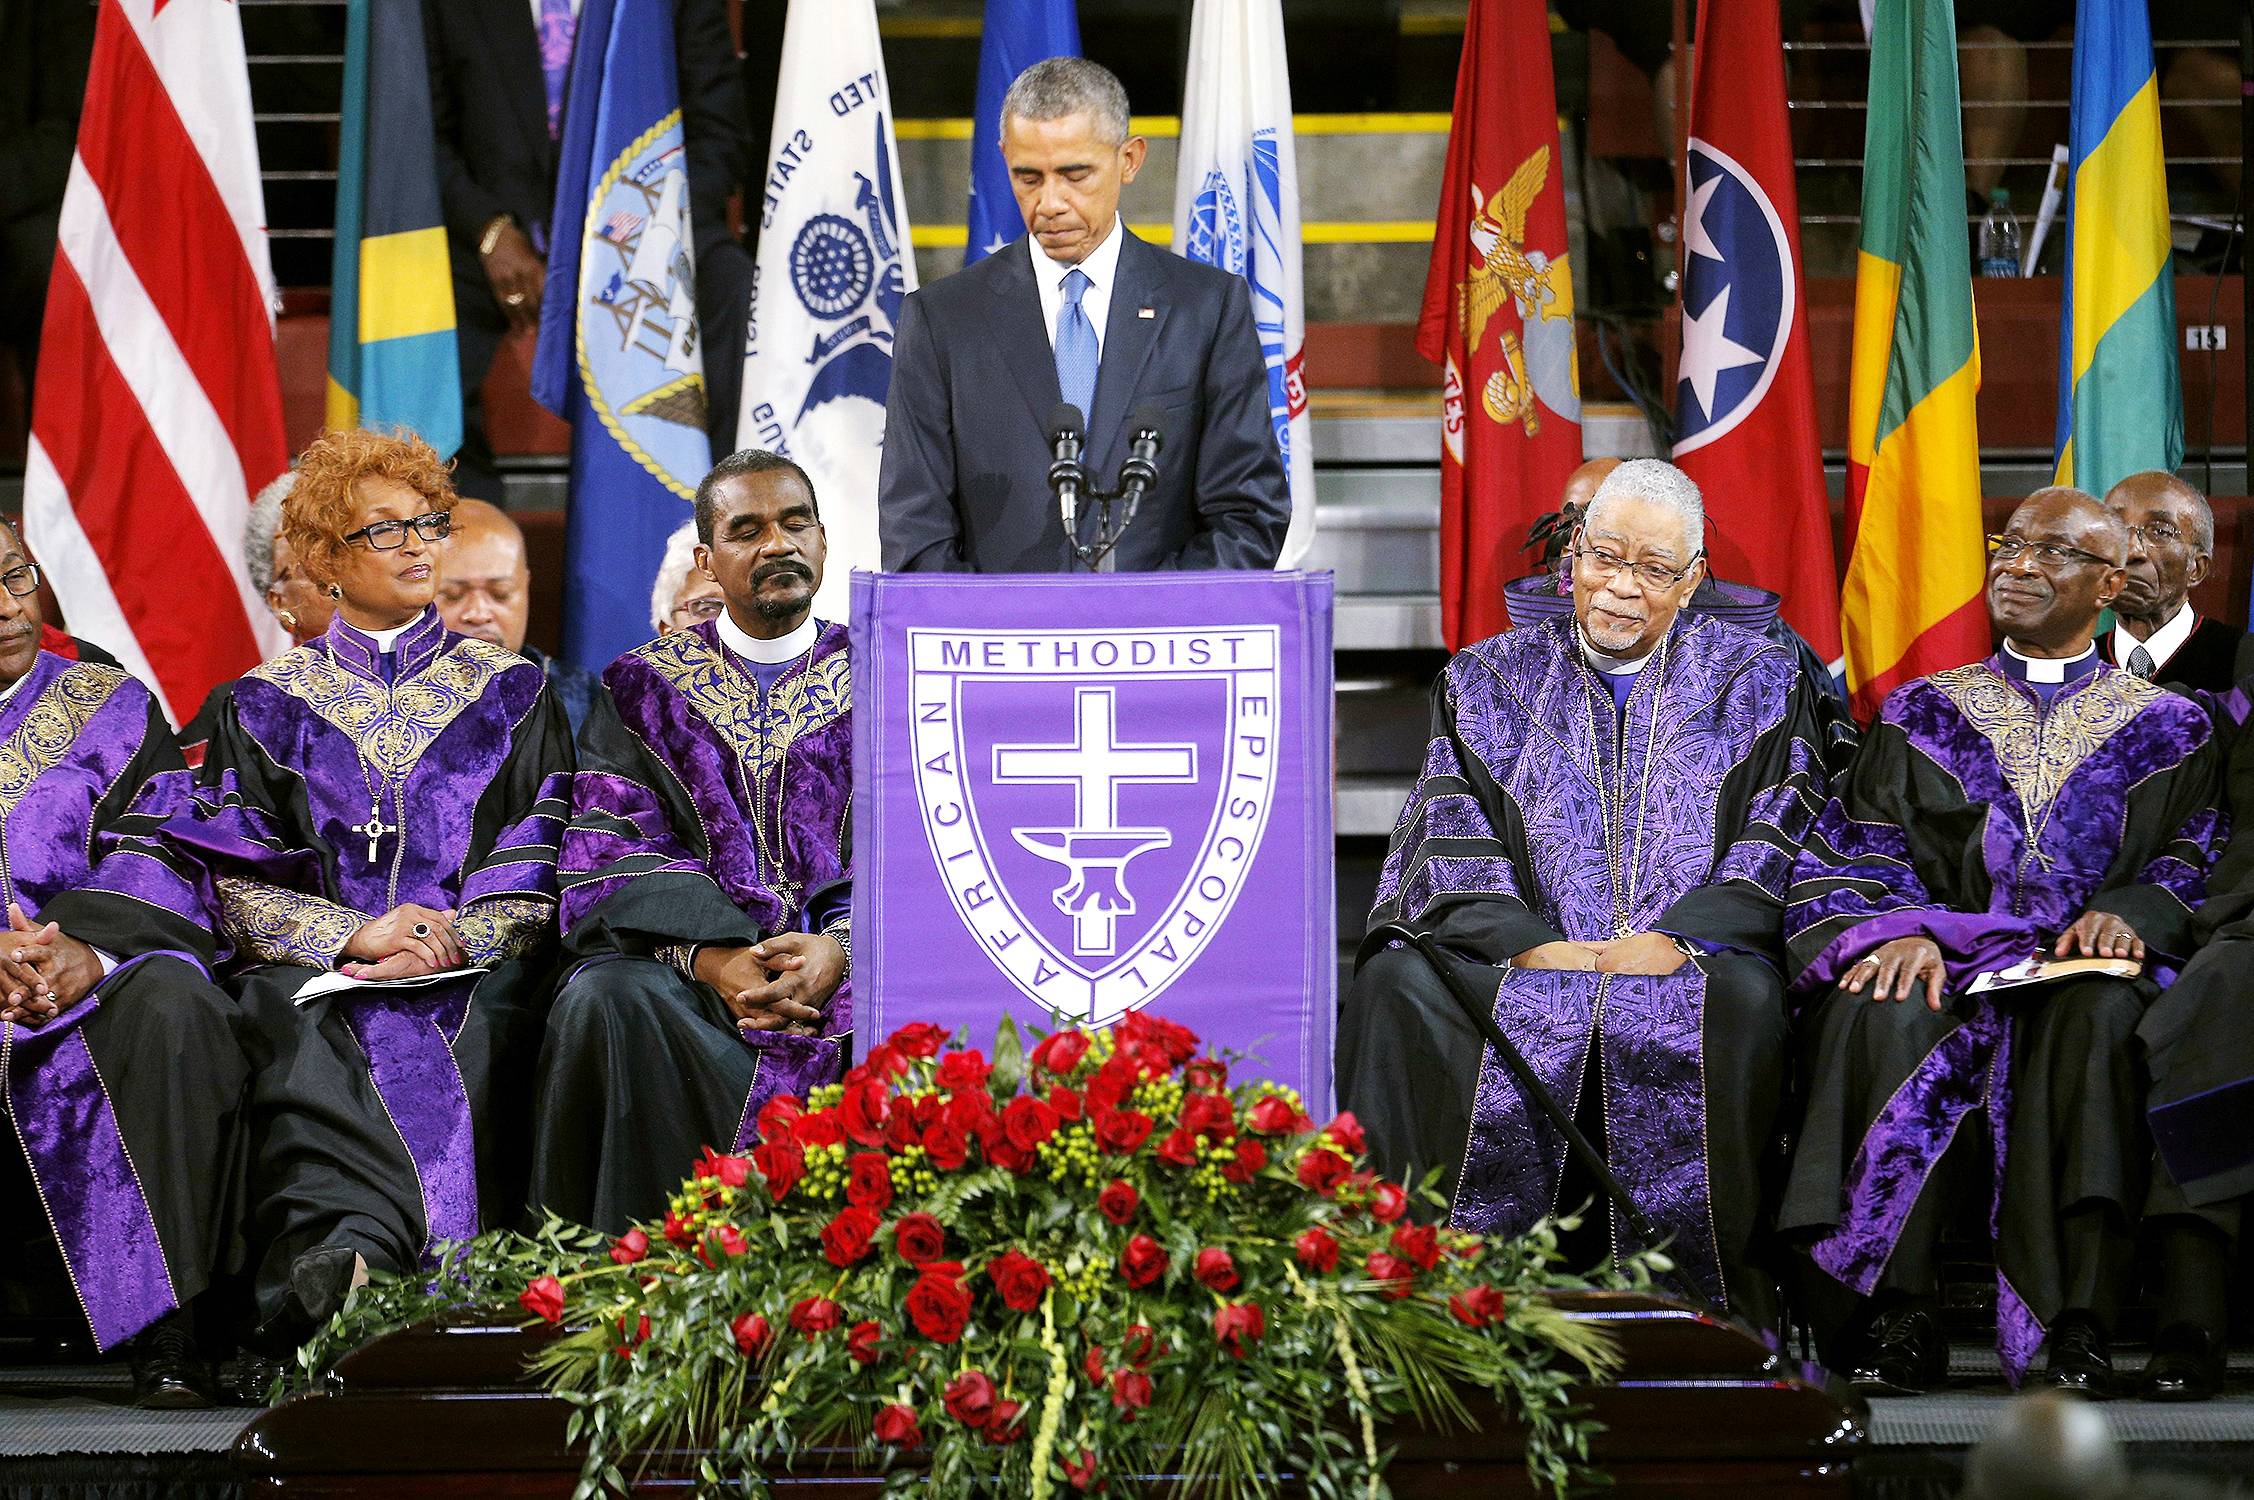 The President Speaks&nbsp; - President Obama eulogized Rev. Clementa Pinckney on Friday at College of Charleston's TD Arena to a crowd of thousands who came to pay their respects to the late pastor of the Emanuel AME Church in Charleston, S.C. &quot;Reverend Pinckney embodied a politics that was neither mean nor small,&quot; Obama said. &quot;He conducted himself quietly, and kindly, and diligently. He was full of empathy…able to walk in someone else’s shoes and see the world through their eyes.&quot; Following a message of grace throughout his speech, POTUS led the auditorium in song as he sang the chorus of &quot;Amazing Grace.&quot; Take a look at a few other moments from the service.&nbsp;(Photo: Brian Snyder /Landov)